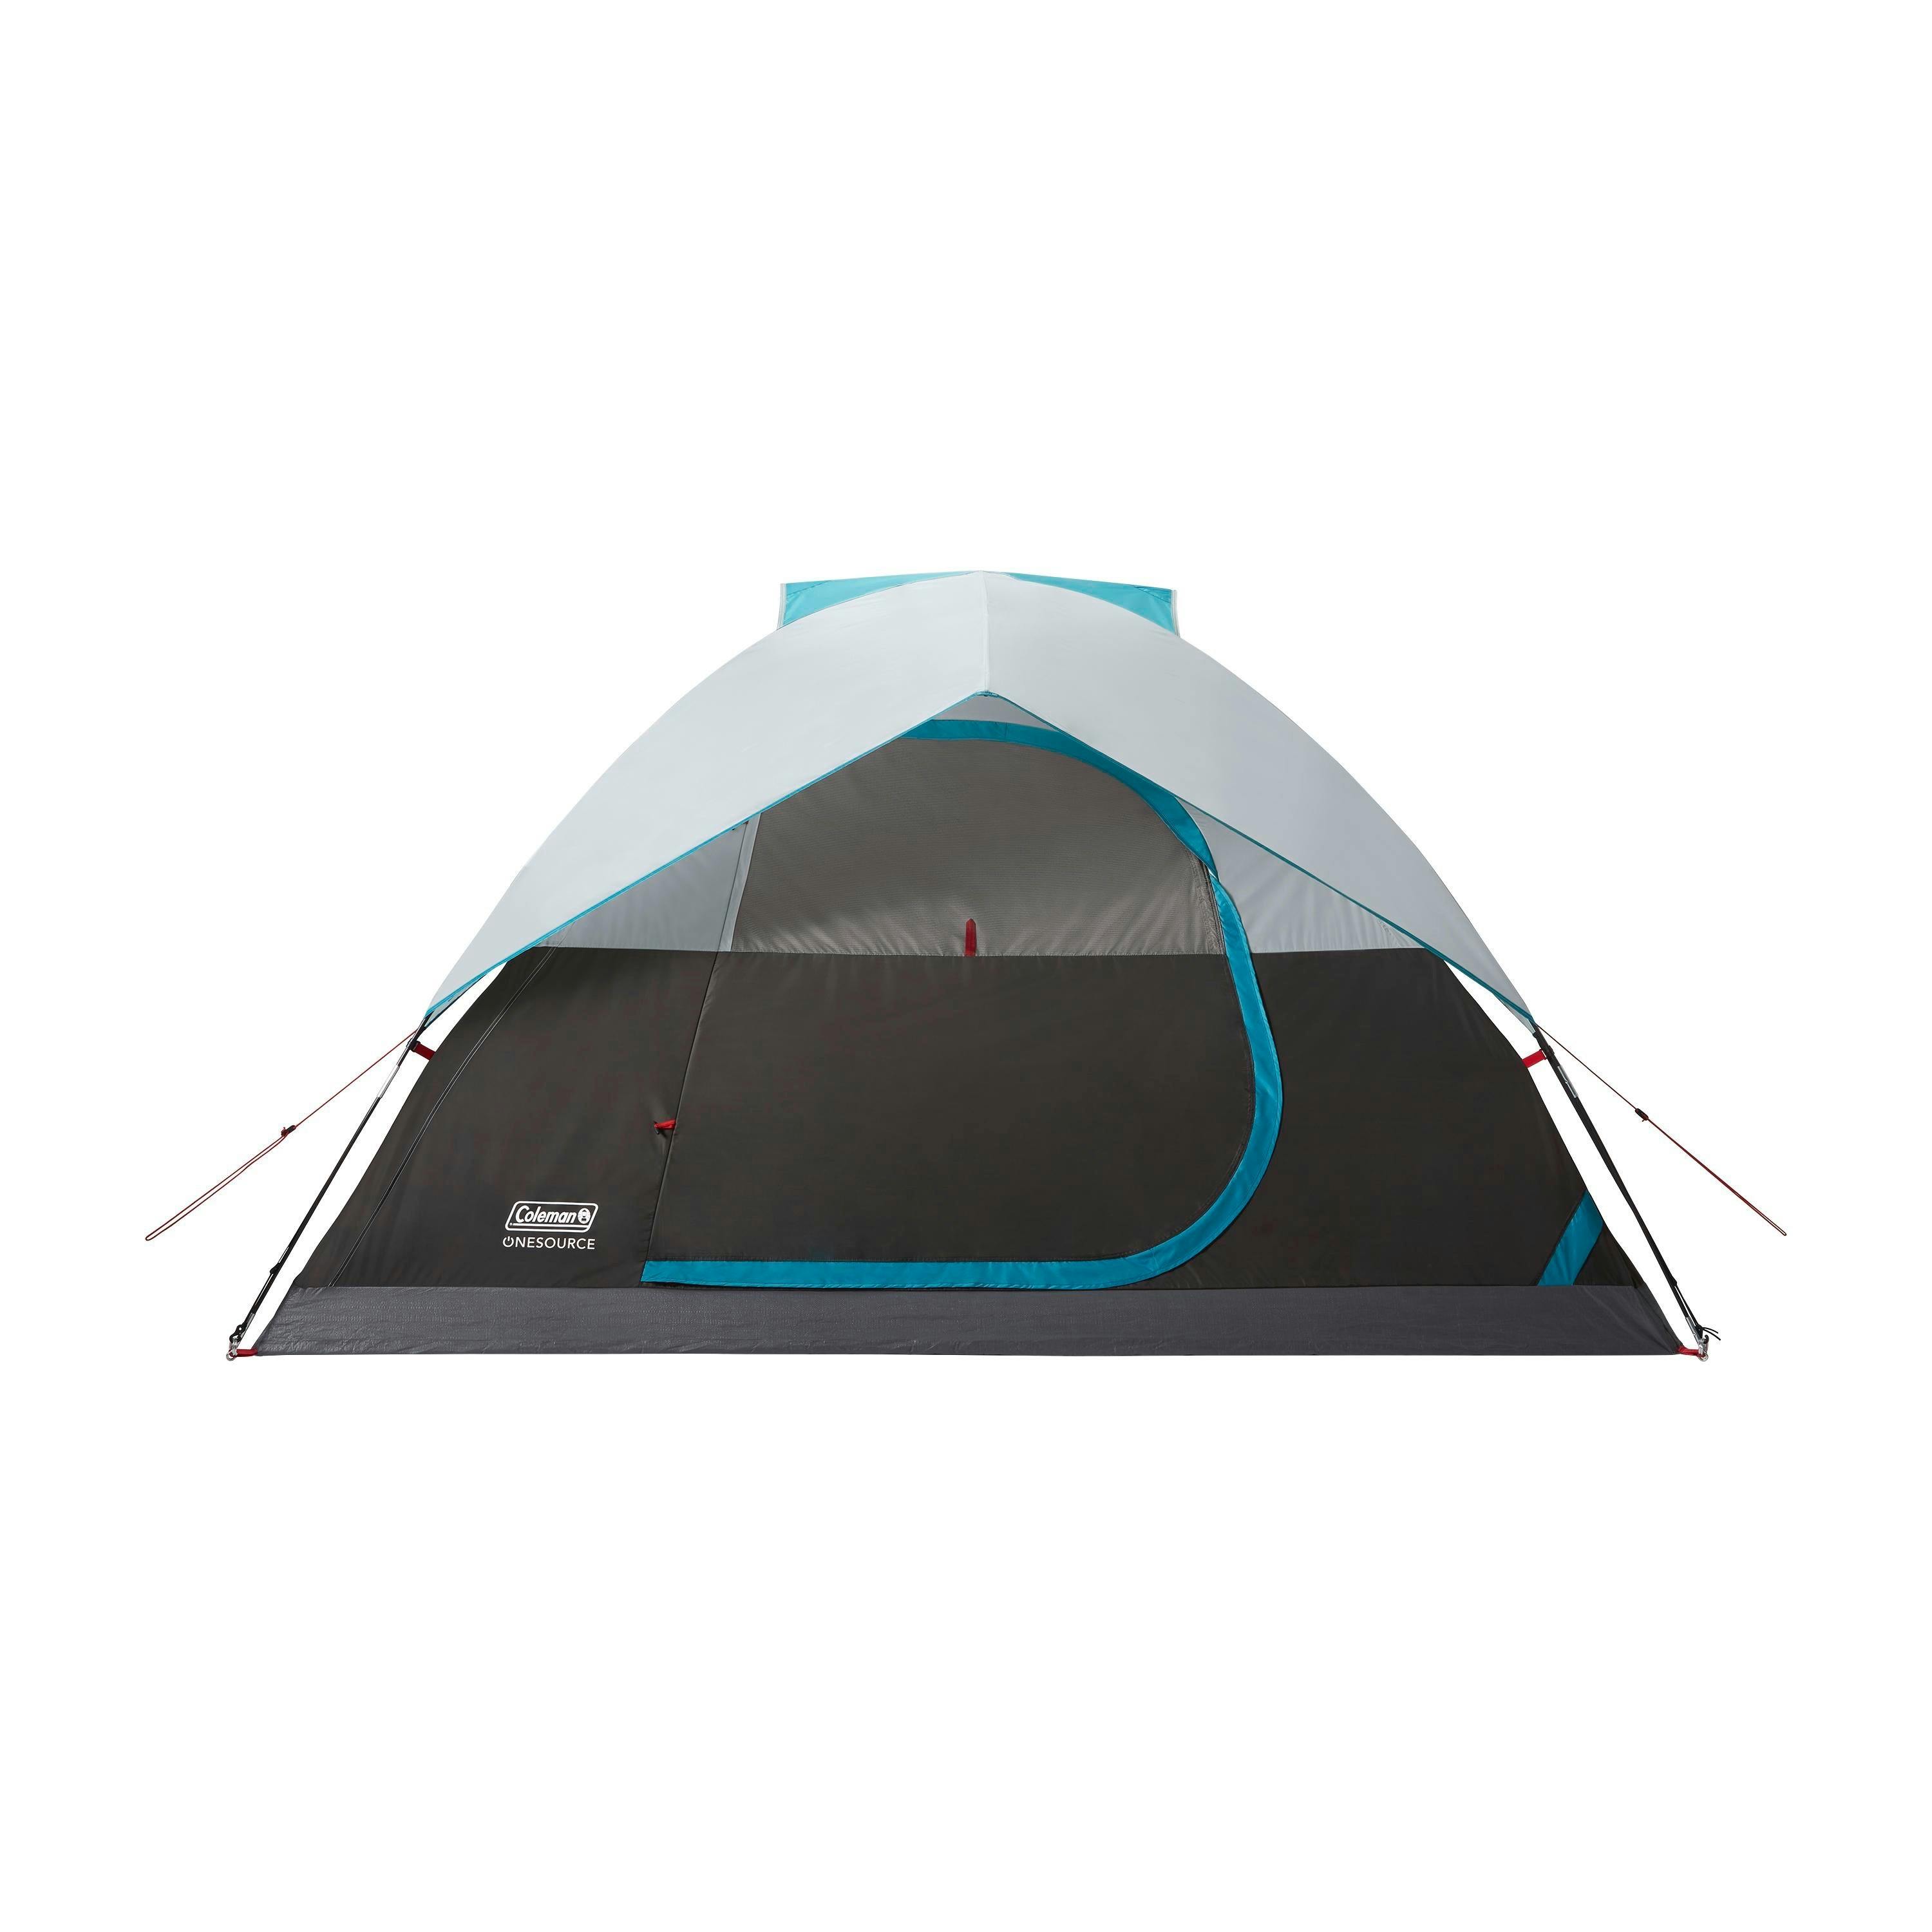 Coleman OneSource Camping Dome Tent with Airflow System and LED Lighting · 6 Person · Black/White/Carribbean Blue